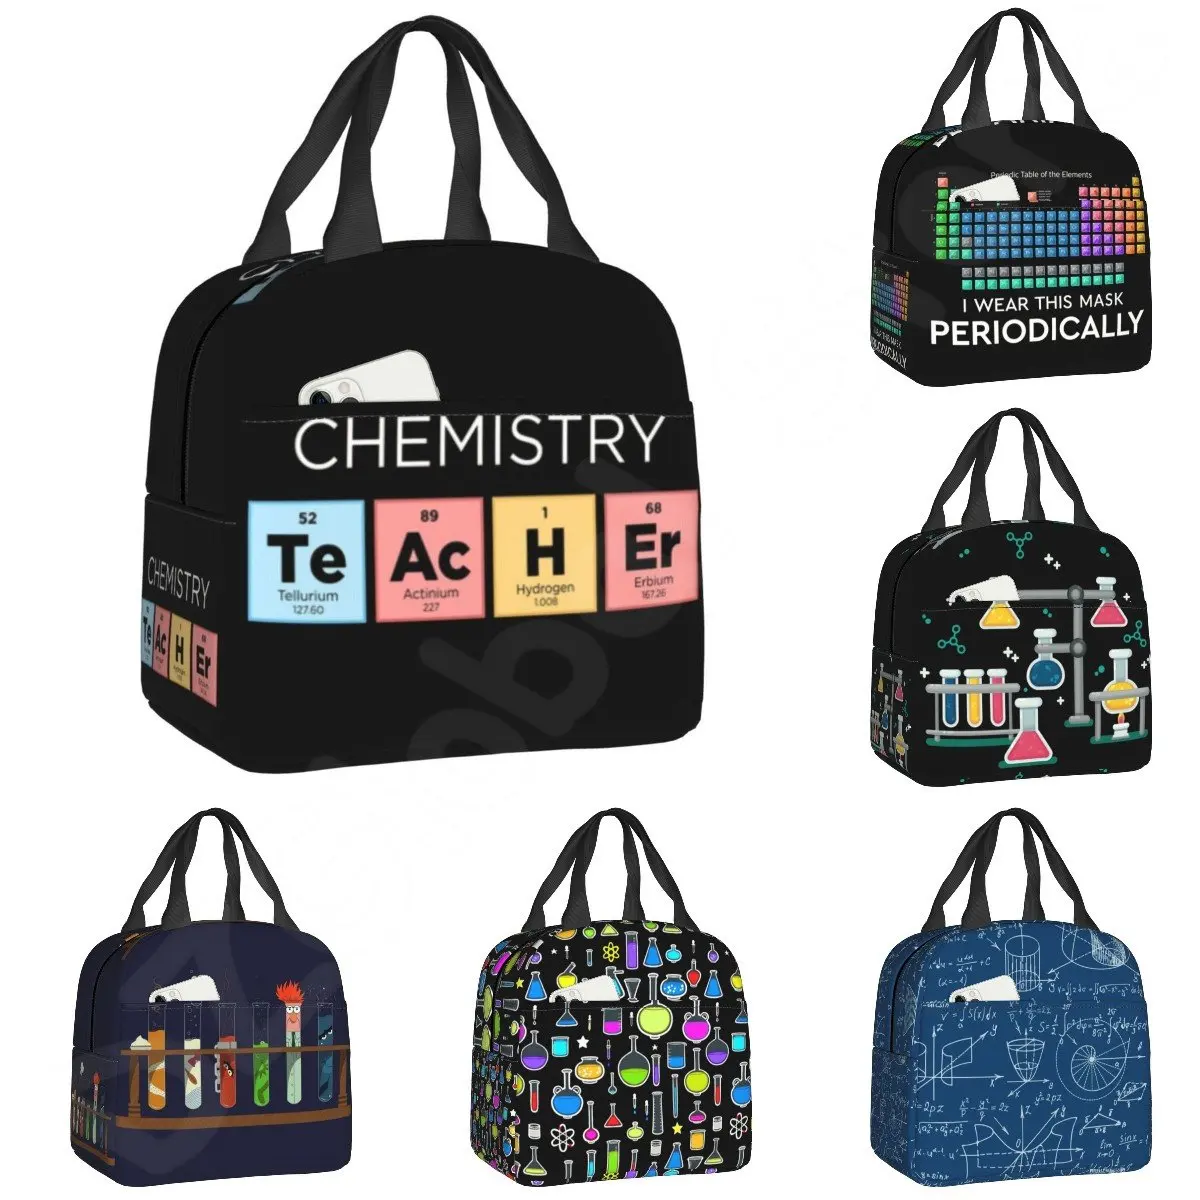 

Chemistry Teacher Periodic Table Insulated Lunch Tote Bag for Kid Science Lab Tech Portable Thermal Cooler Food Lunch Box School